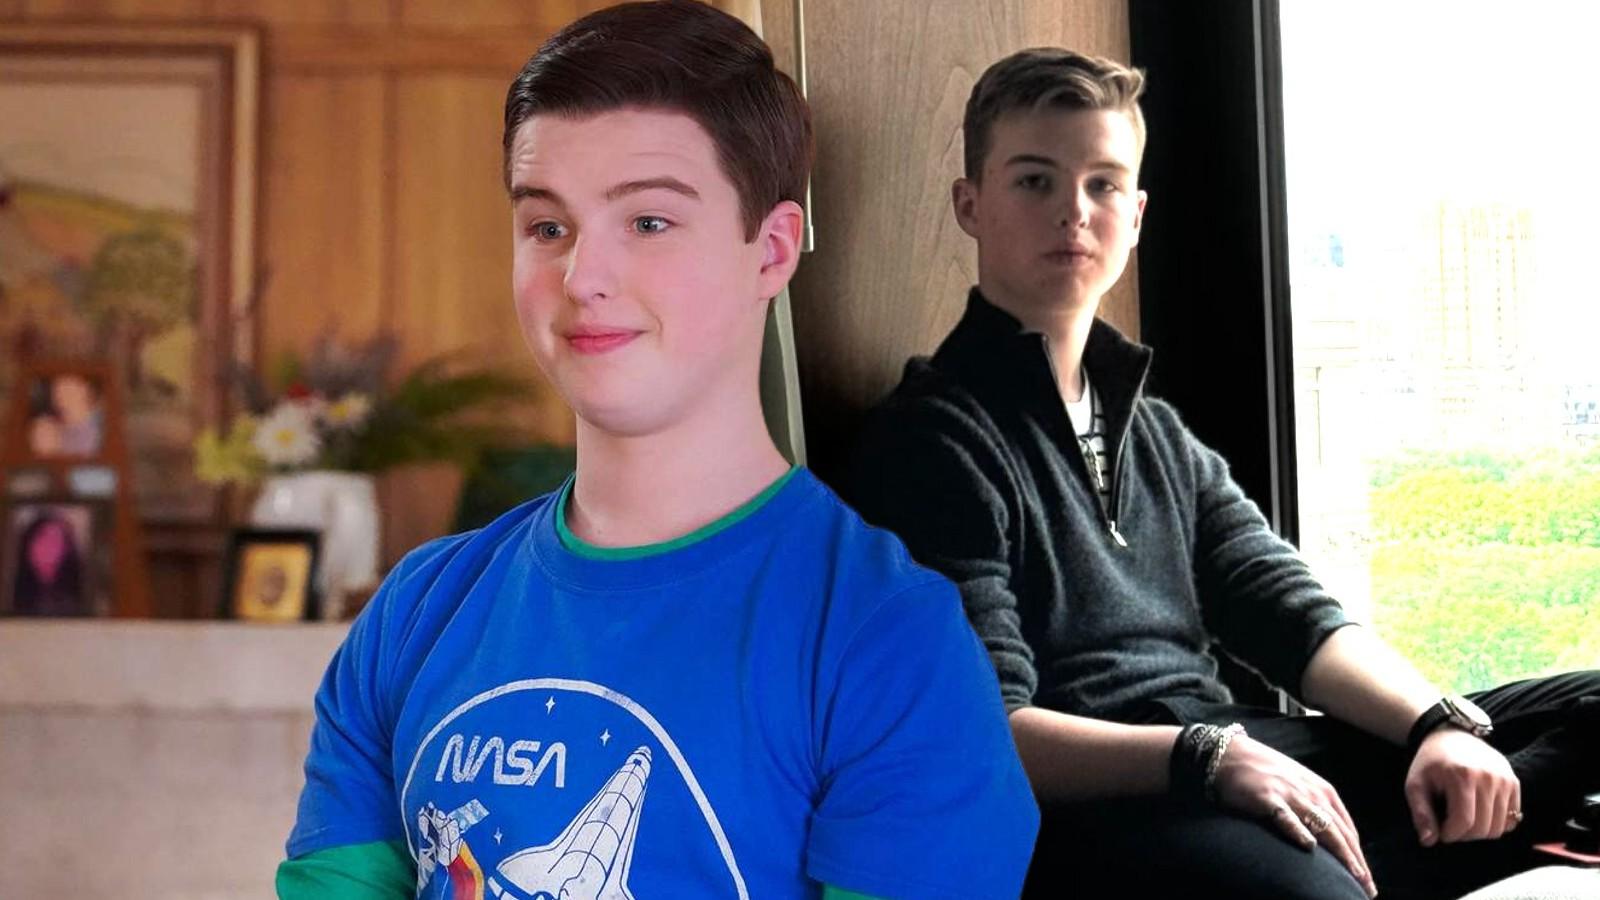 Iain Armitage in Young Sheldon and a screenshot of his Instagram